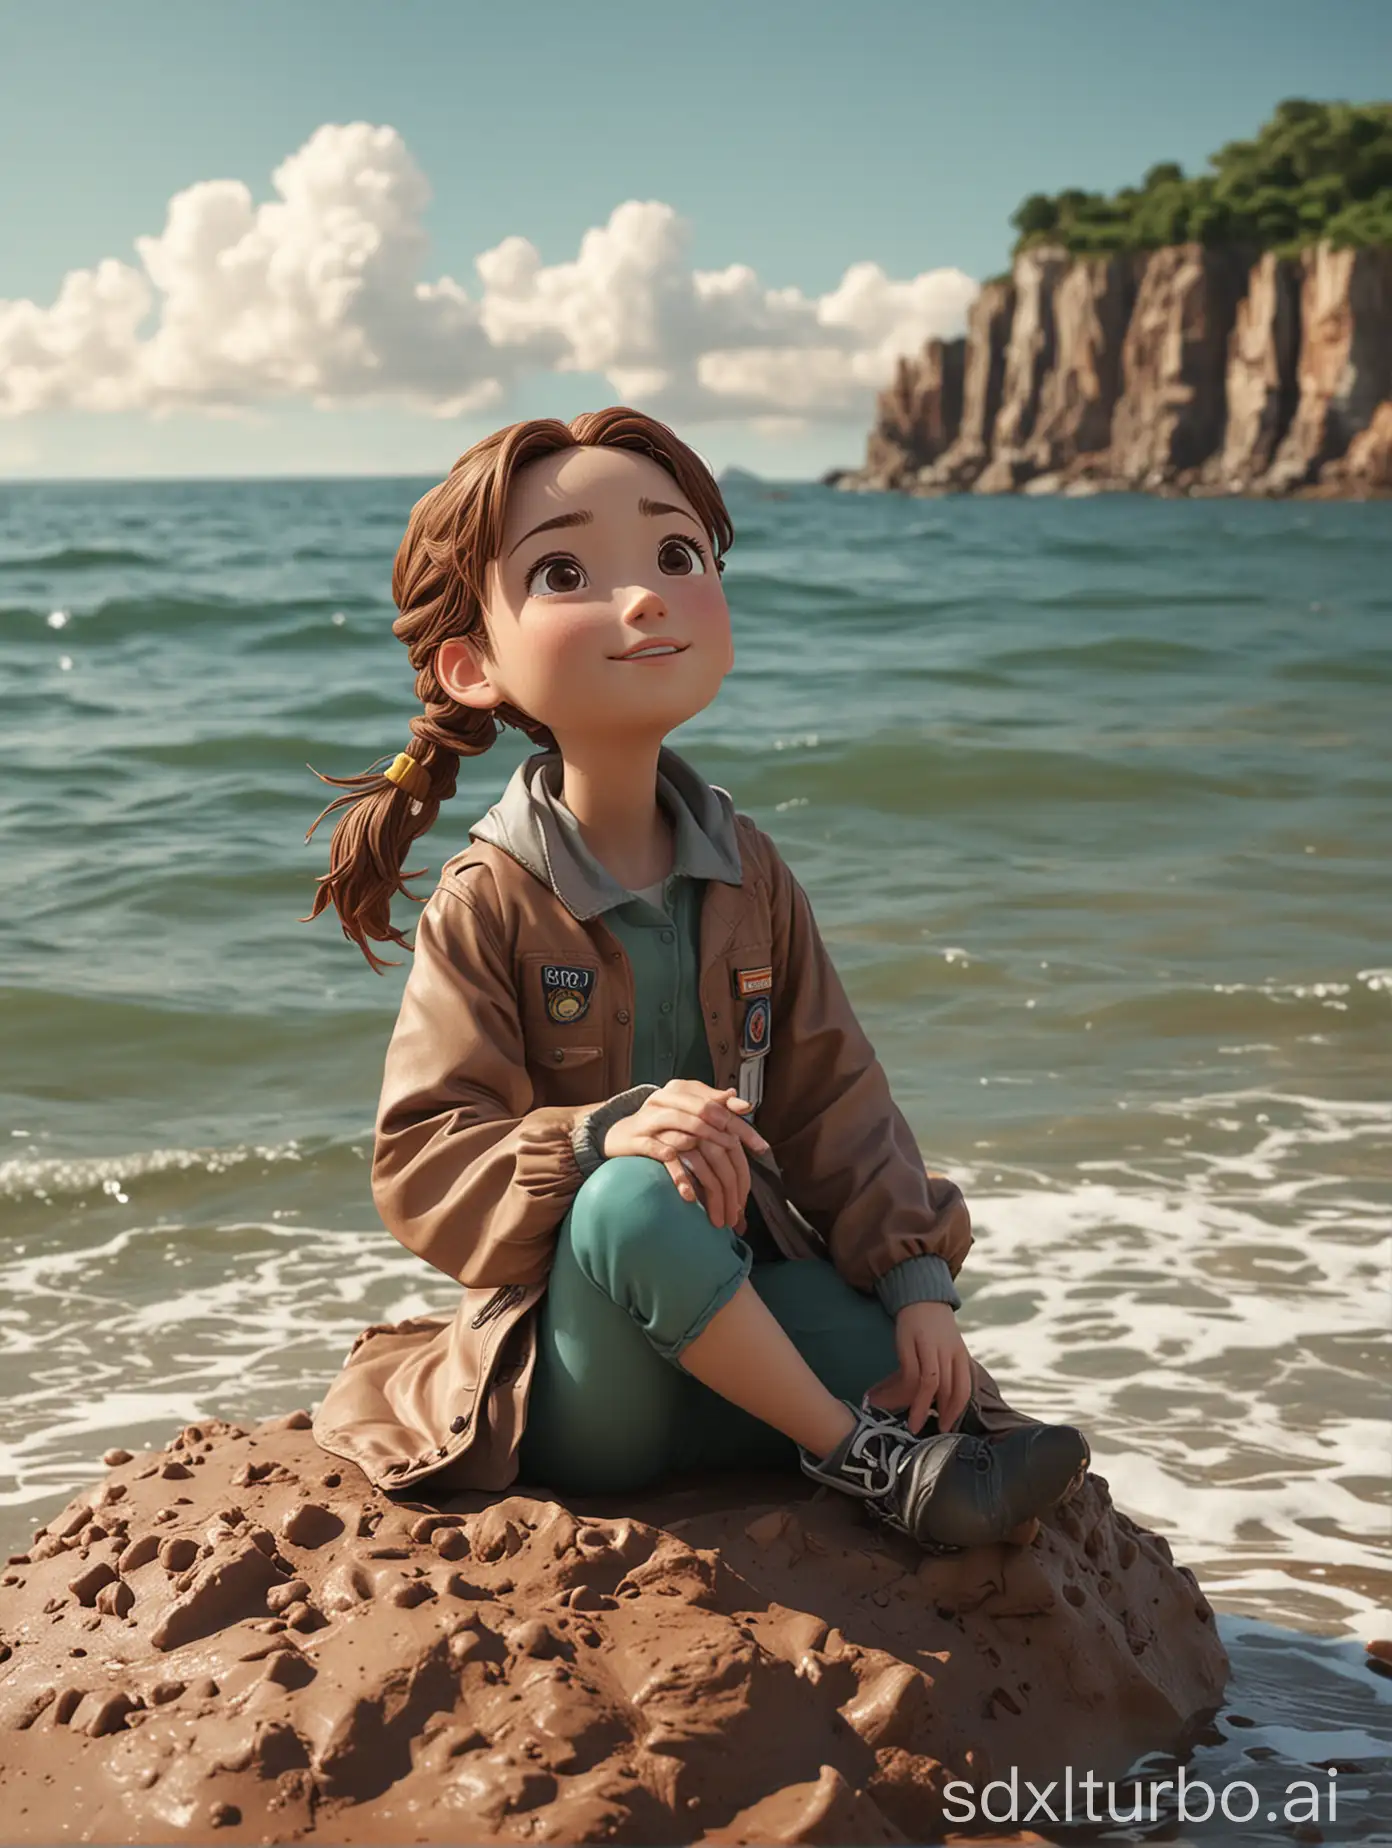 renyu tuling,1girl,solo,brown hair,looking up,sitting,ocean,day,arm up,sky,ponytail,water,jacket,outdoors,landscape,seaside,Clay style,
A fine clay model using clay material,clay texture,clay texture texture,dynamic Angle,dynamic pose,In the style of clay animation,stop-motion animation,3D cartoon characters,using plasticine material,
The artwork is done in a clayey style with plasticine materials,percussive visuals,surreal dreamlike style,
<lora:renyu tuling_20240505195328:0.8>,renyu tuling,